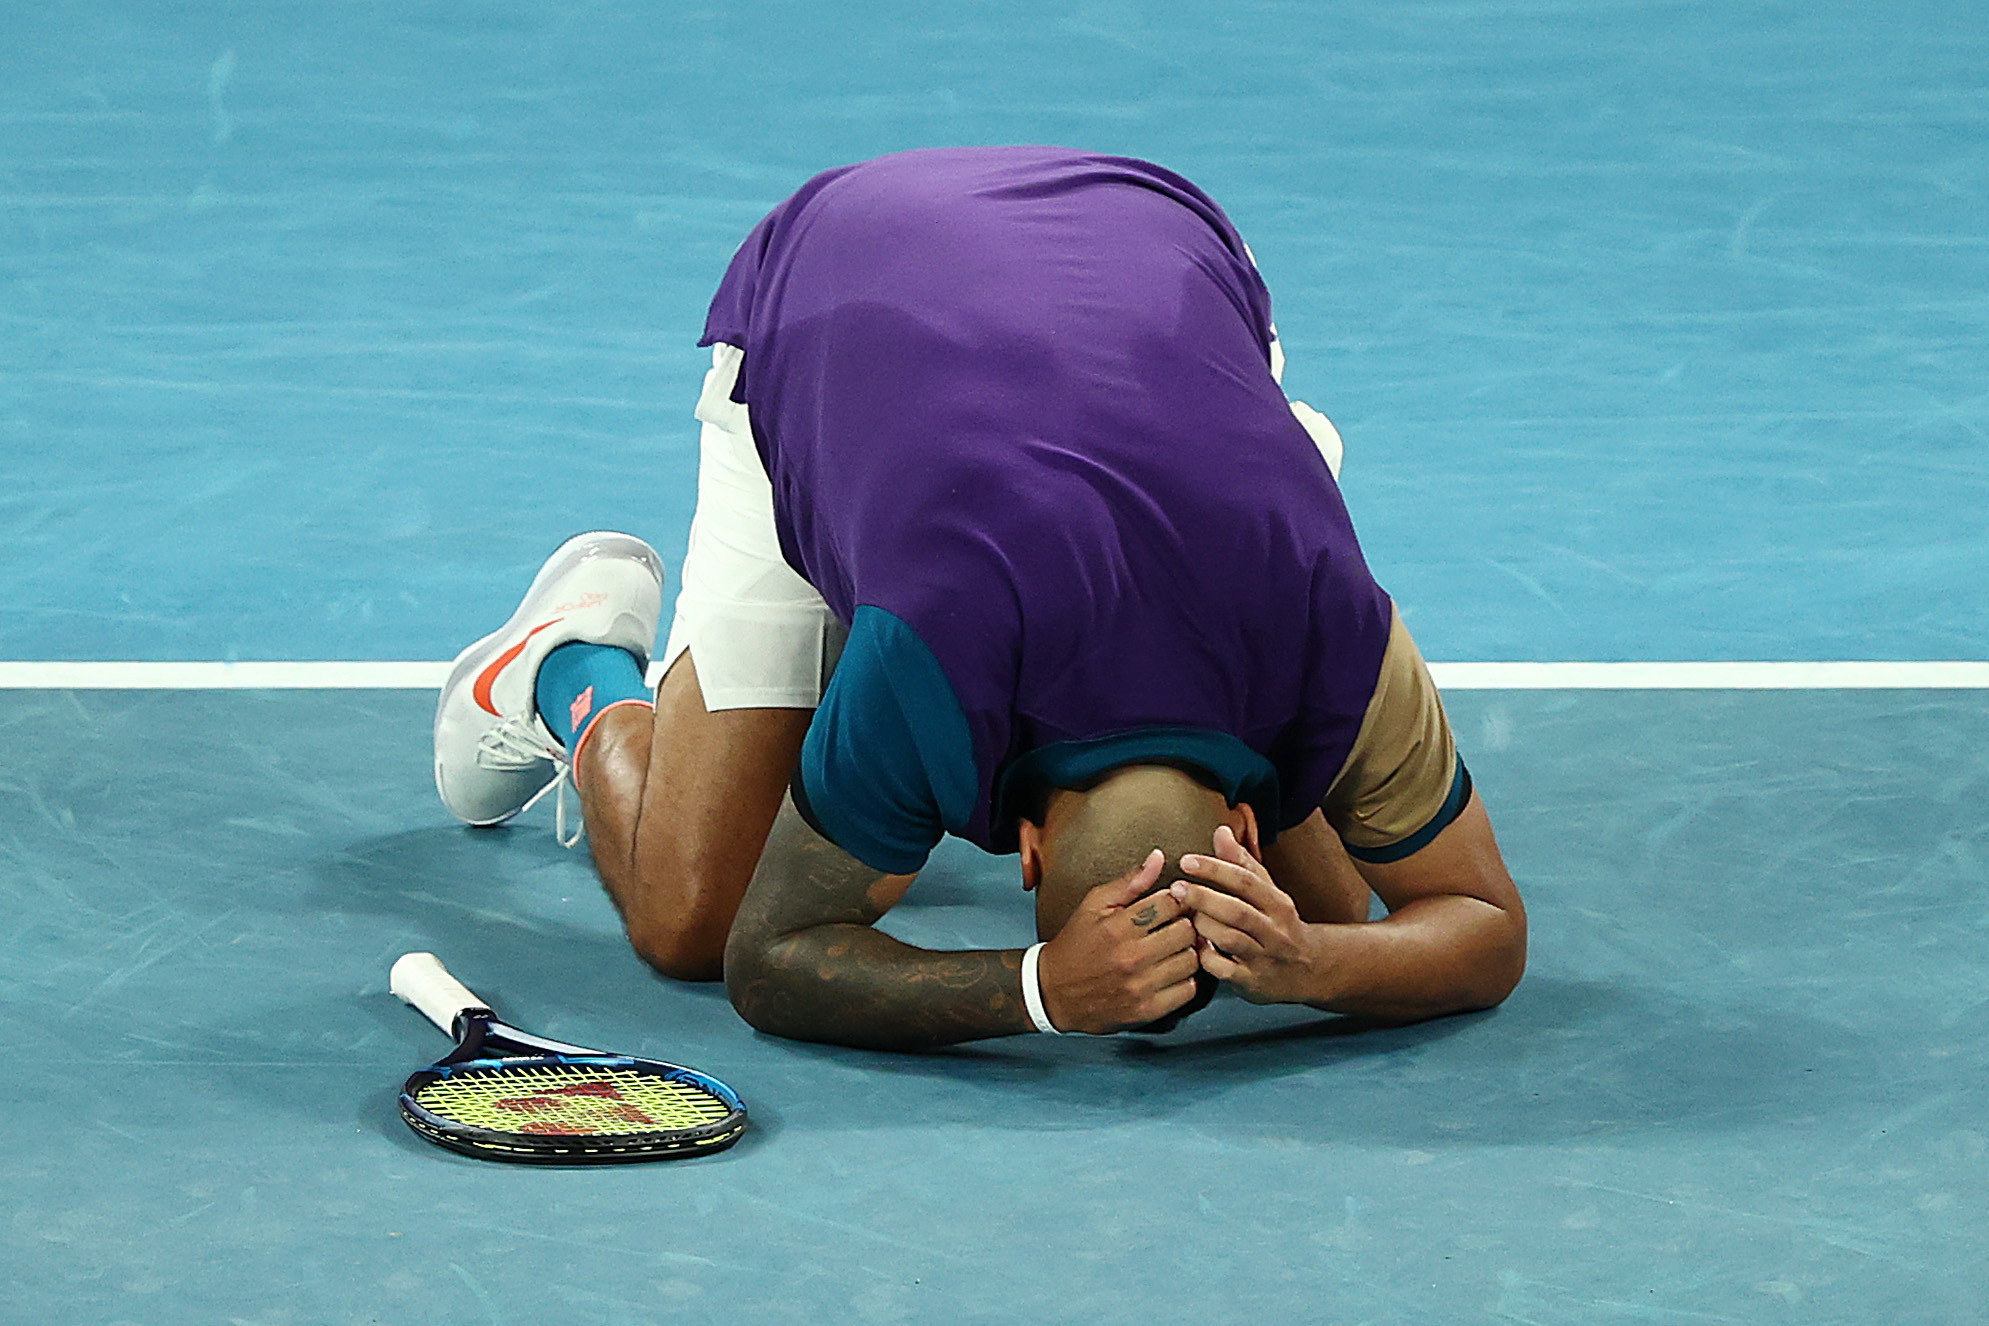 An emotional Nick Kyrgios collapses to the court after coming from behind to win in five sets ©Getty Images